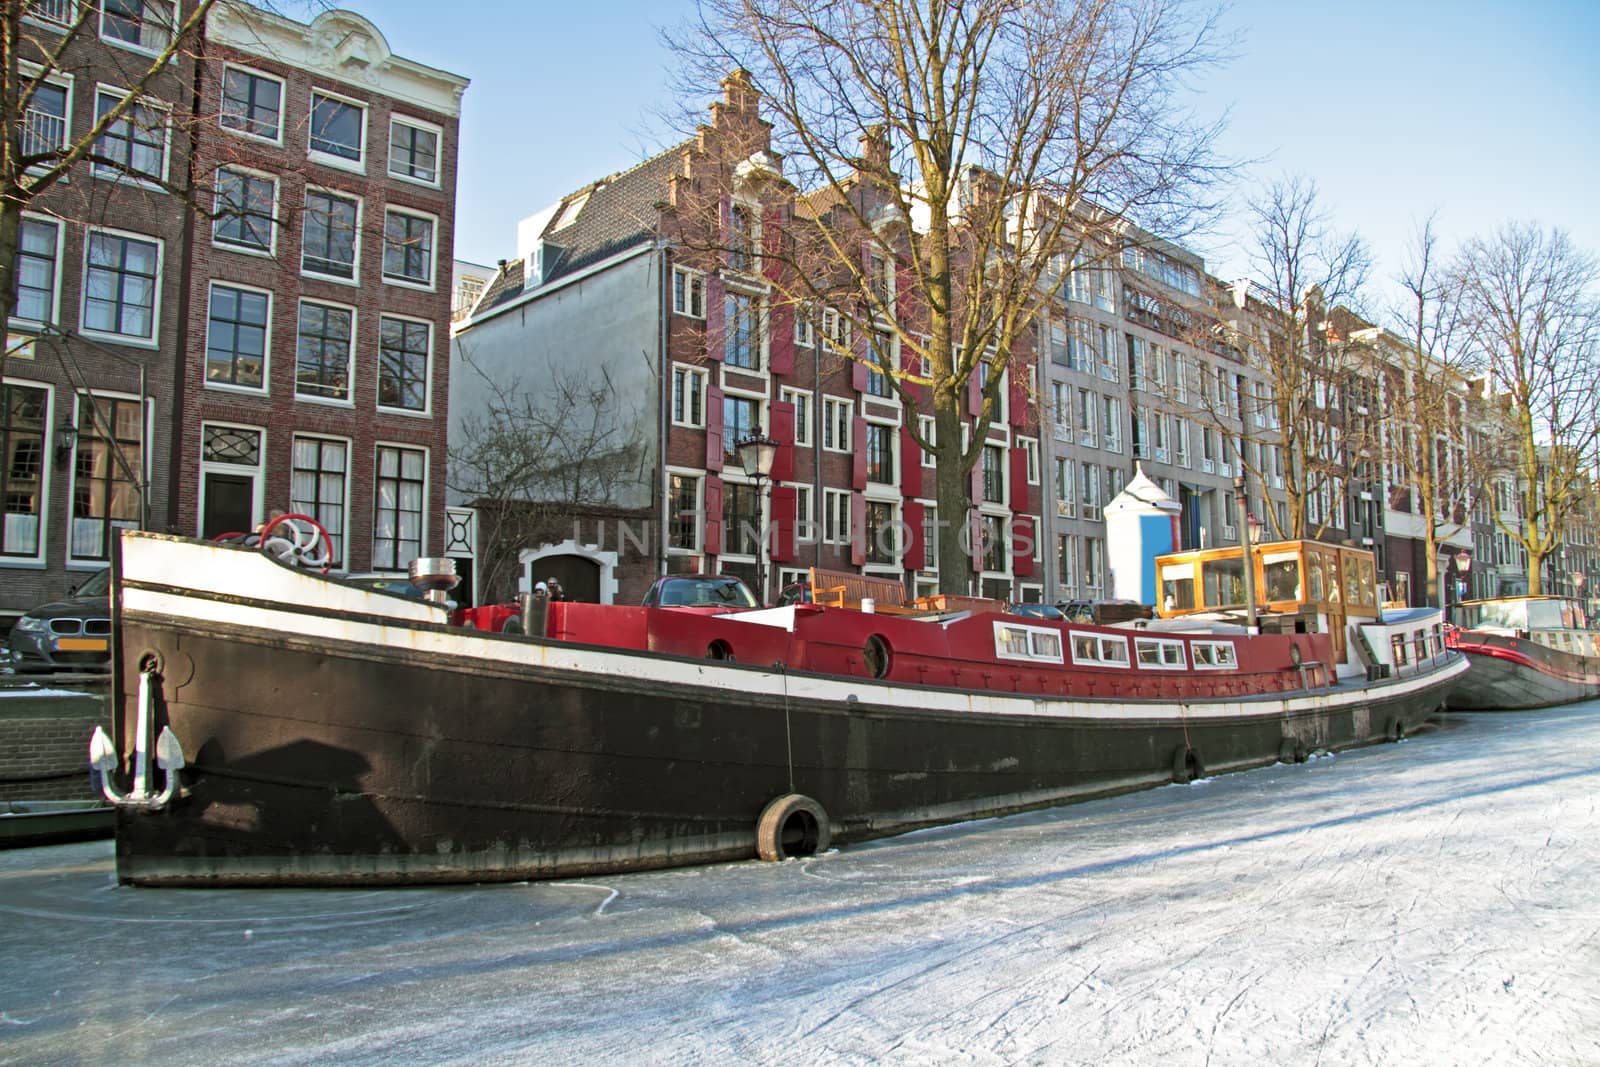 Amsterdam innercity in winter in the Netherlands by devy